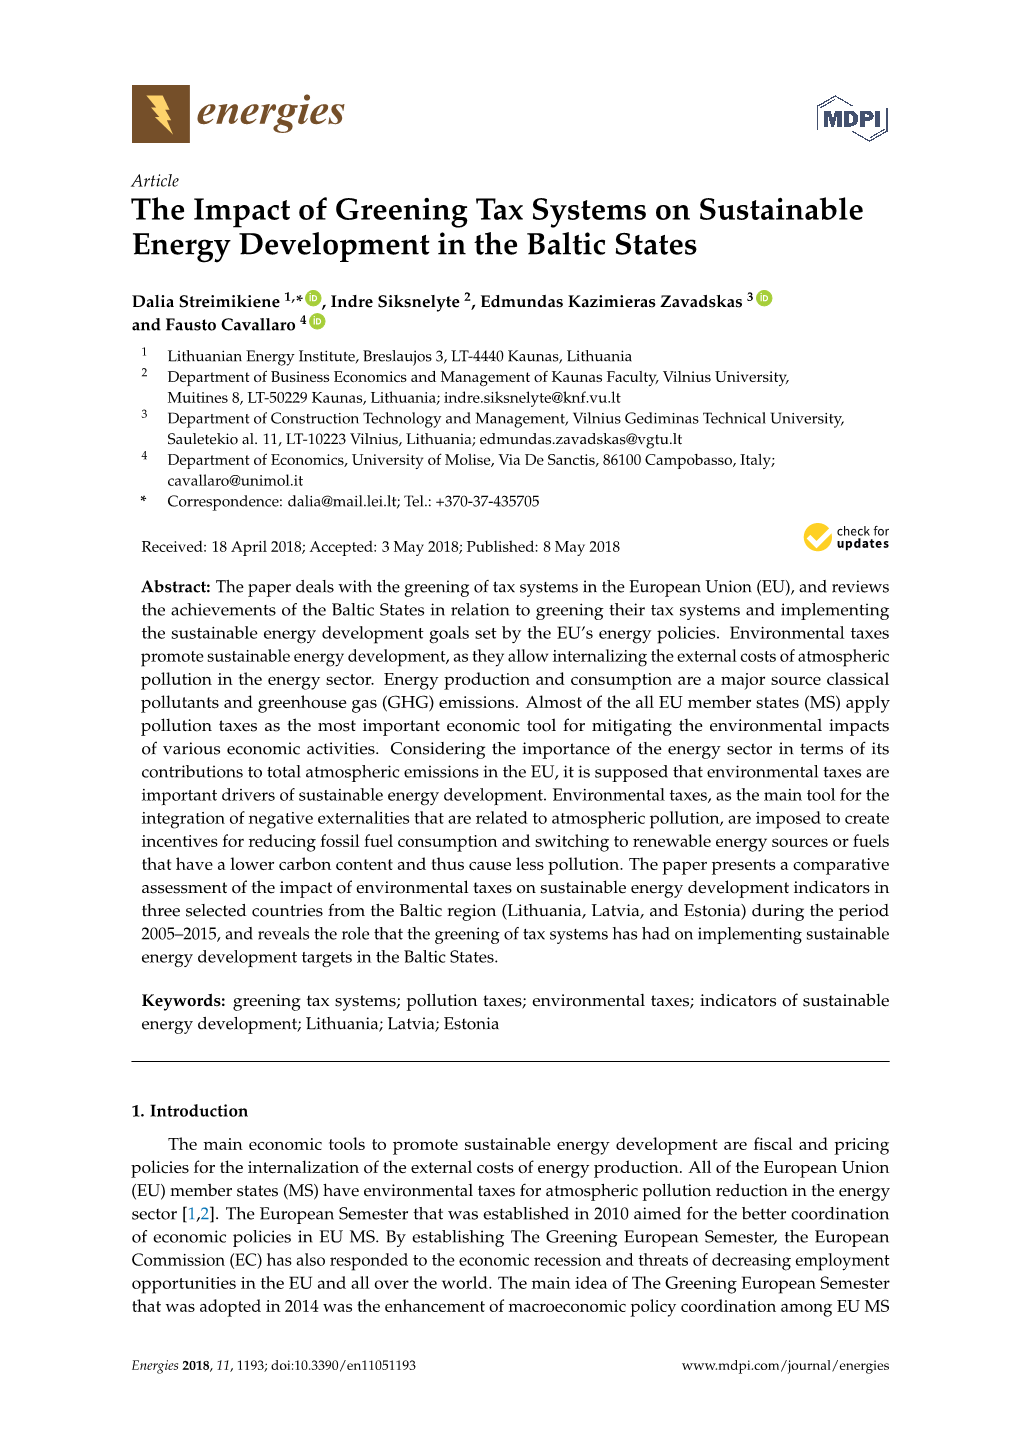 The Impact of Greening Tax Systems on Sustainable Energy Development in the Baltic States